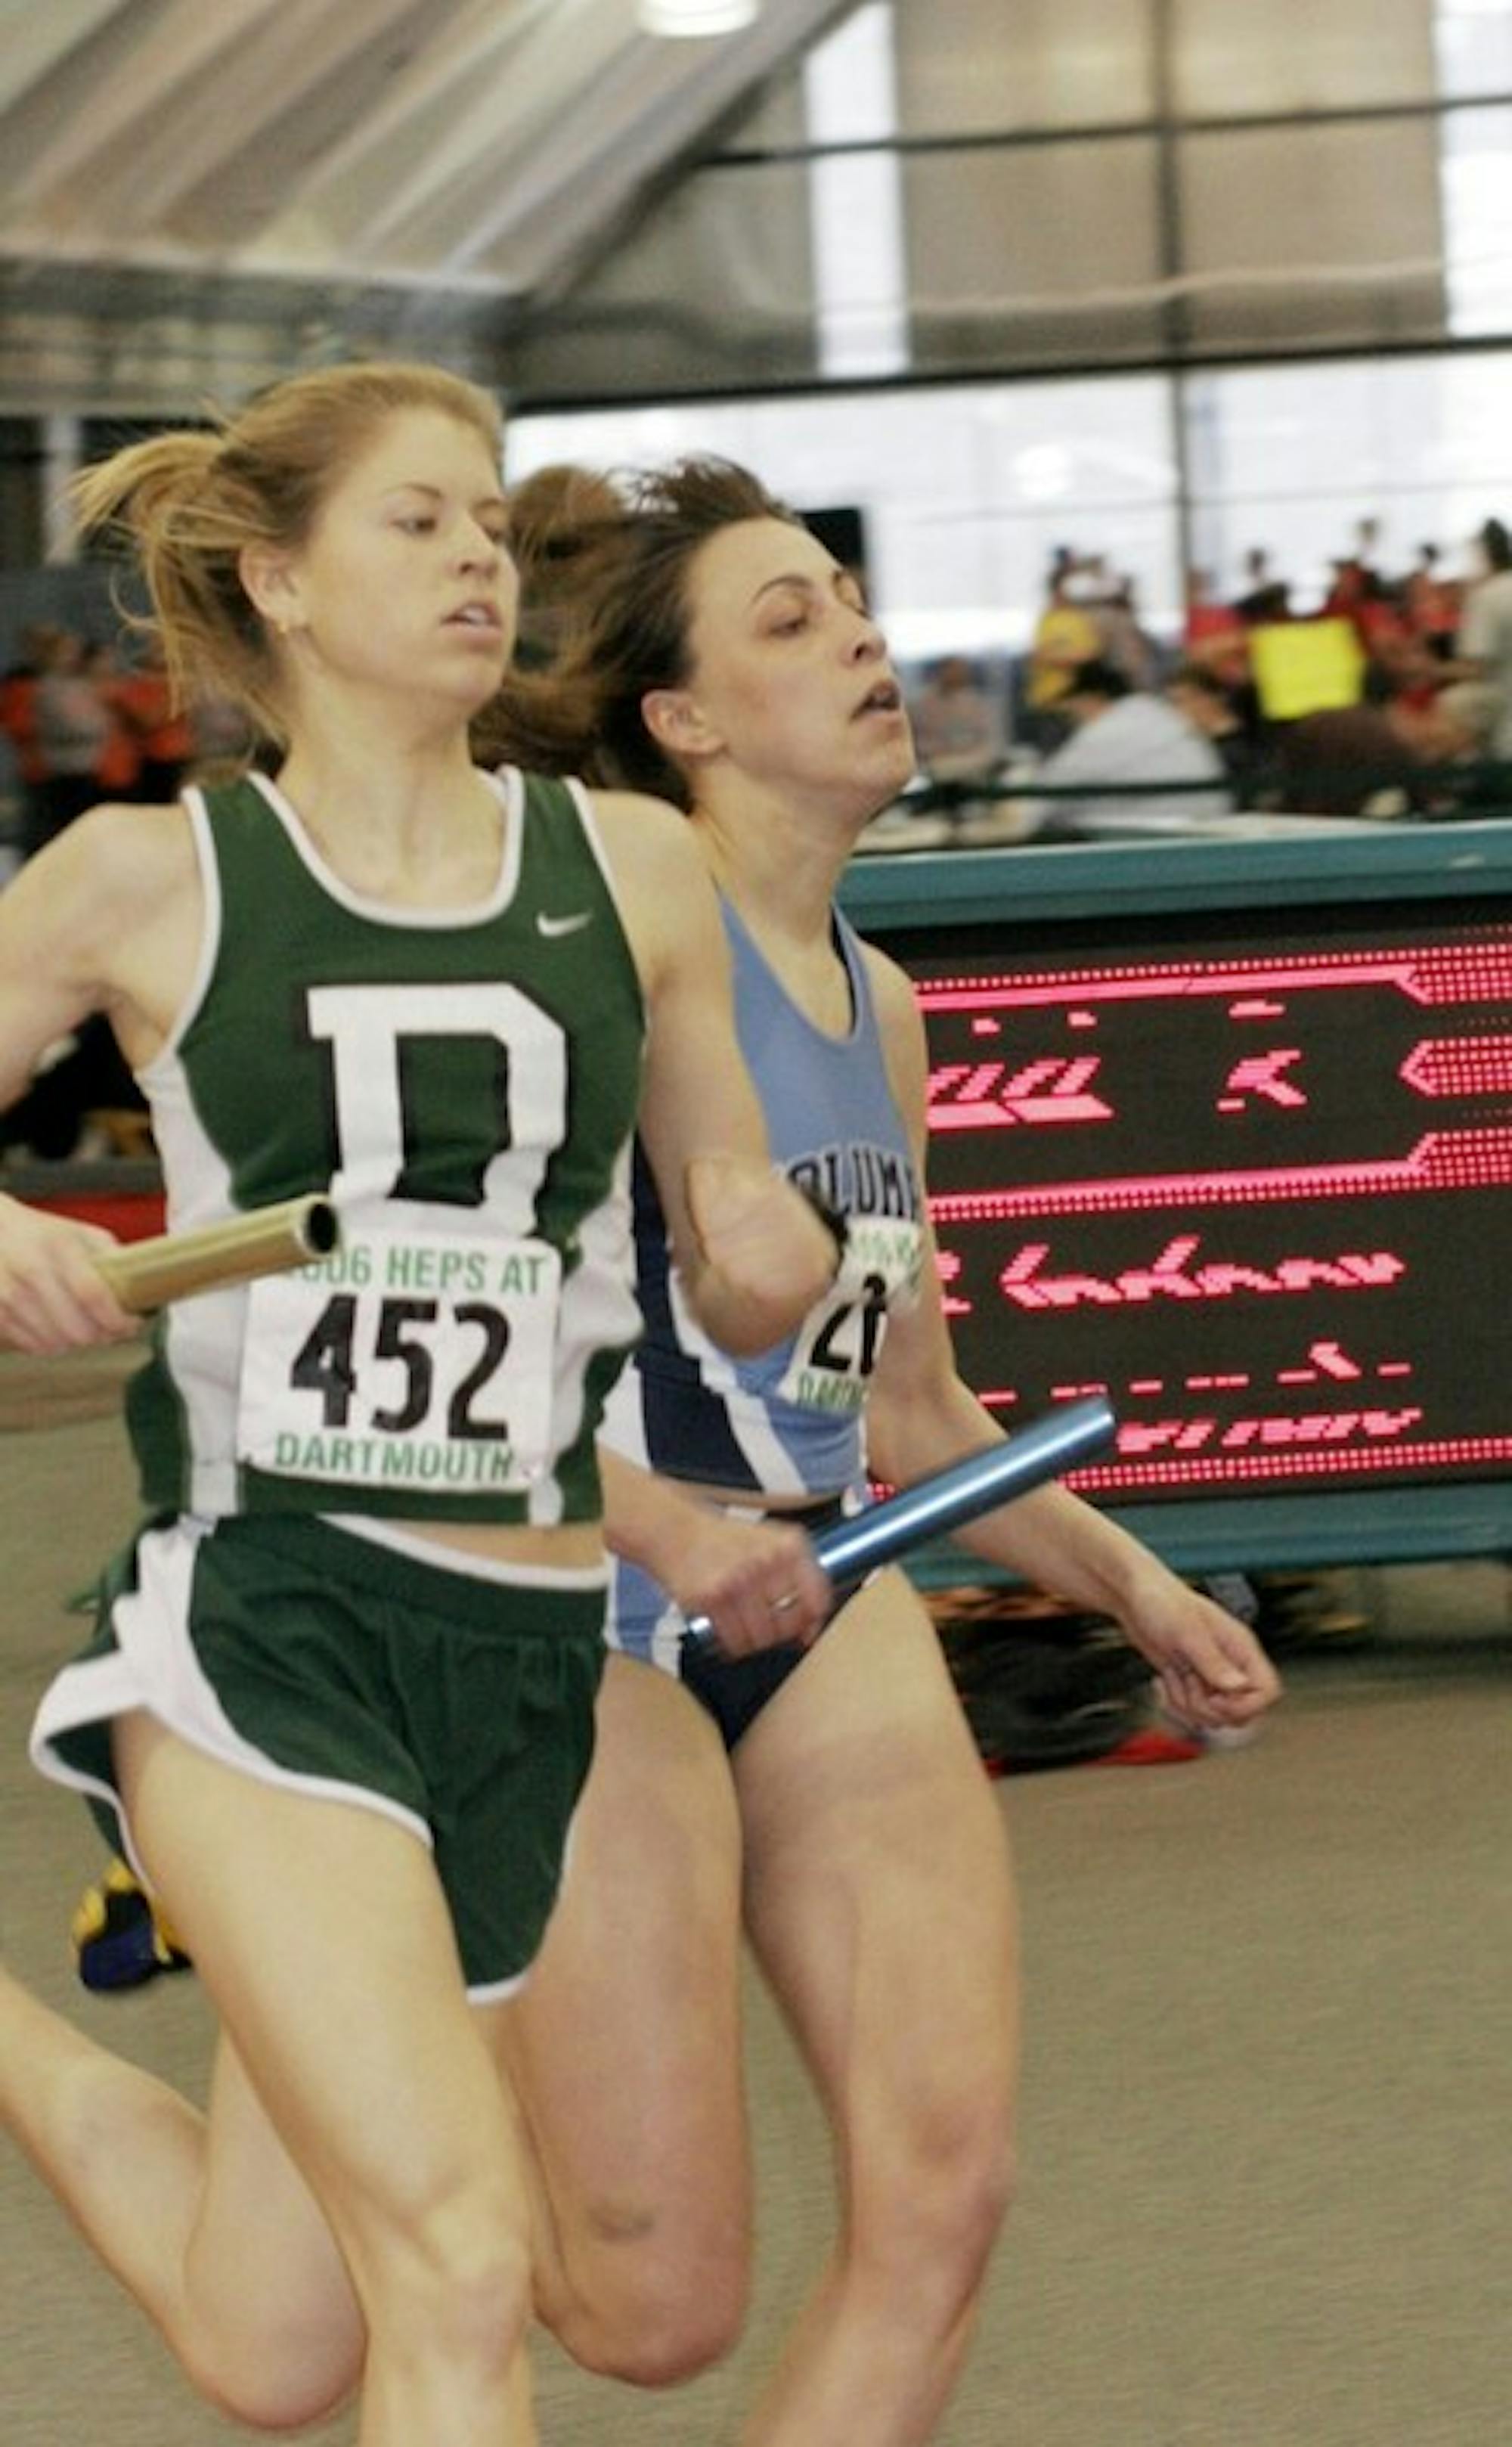 Lydia Blandy '06 placed 25th in the 800 meter run at the Princeton meet.